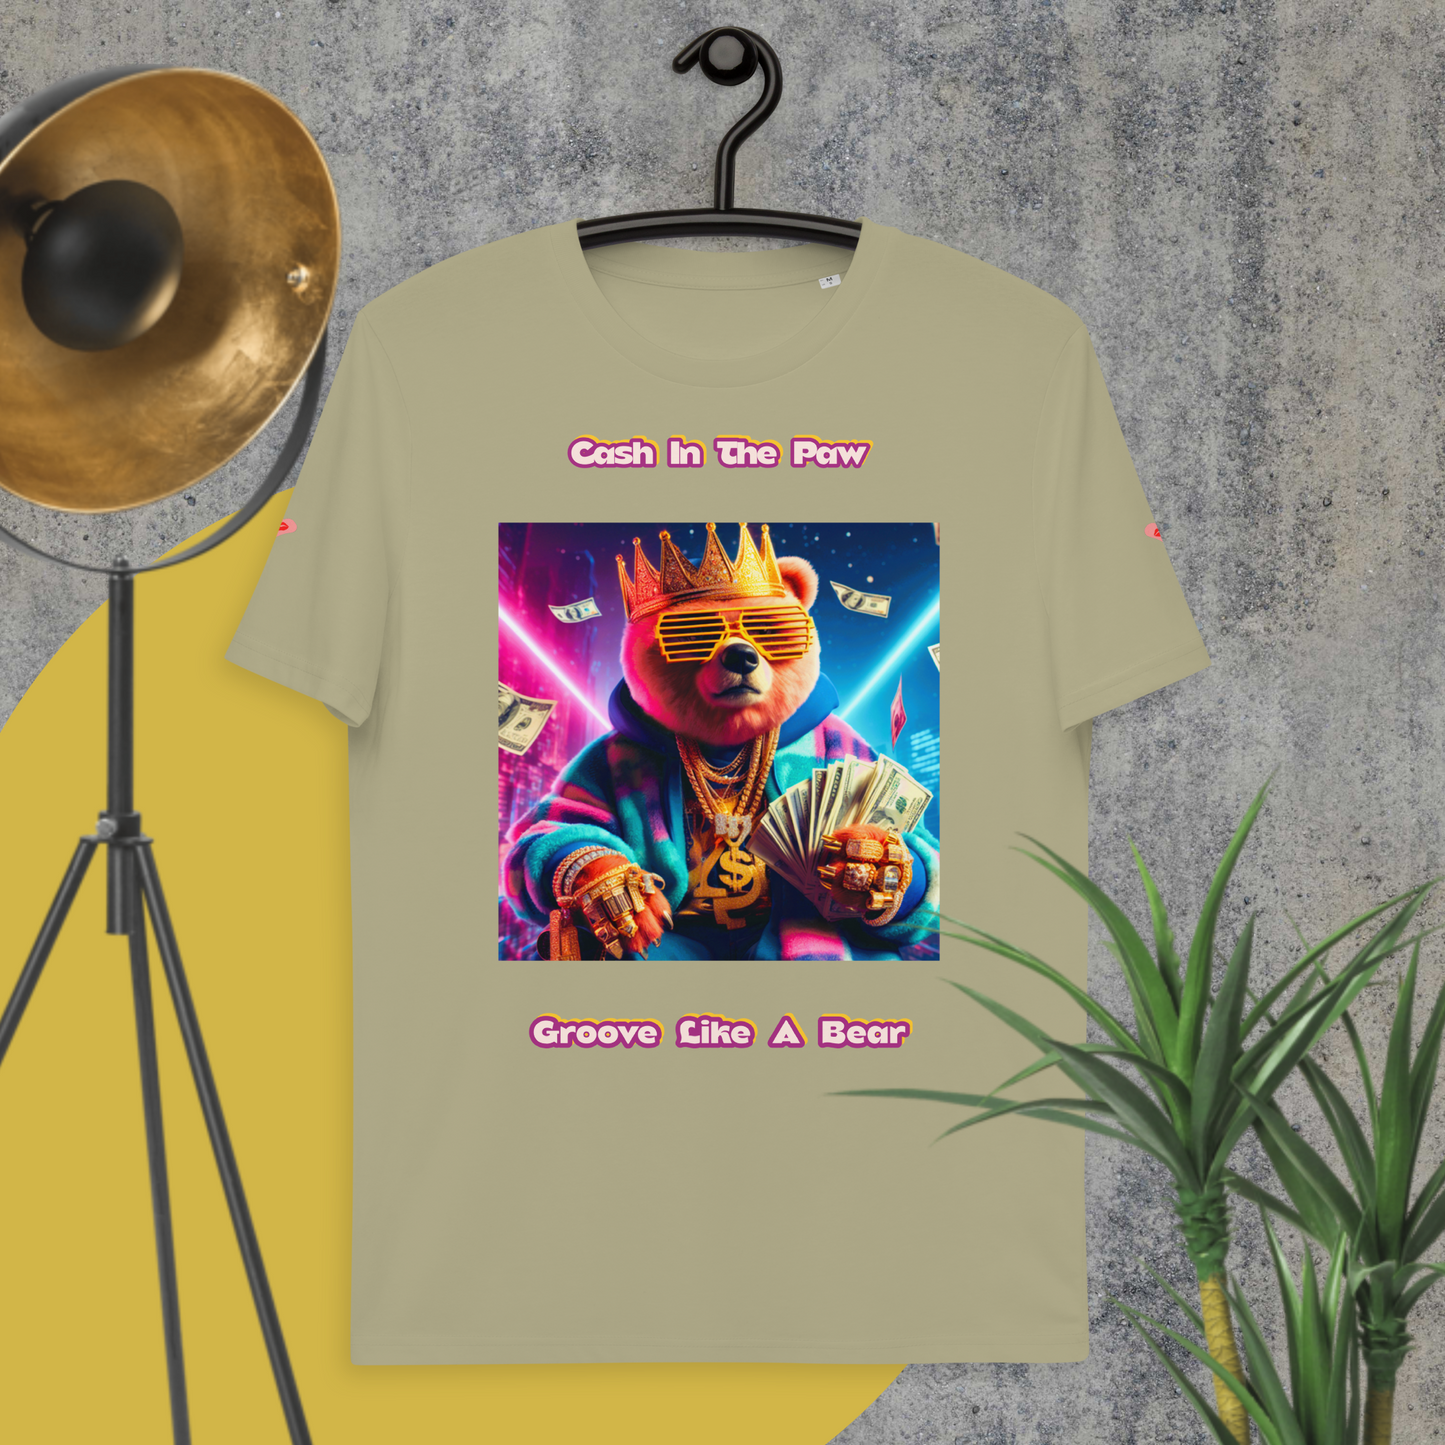 💕Groove Like a Bear🐻 Cash in the Paw💵🐾 Unisex organic cotton t-shirt👕